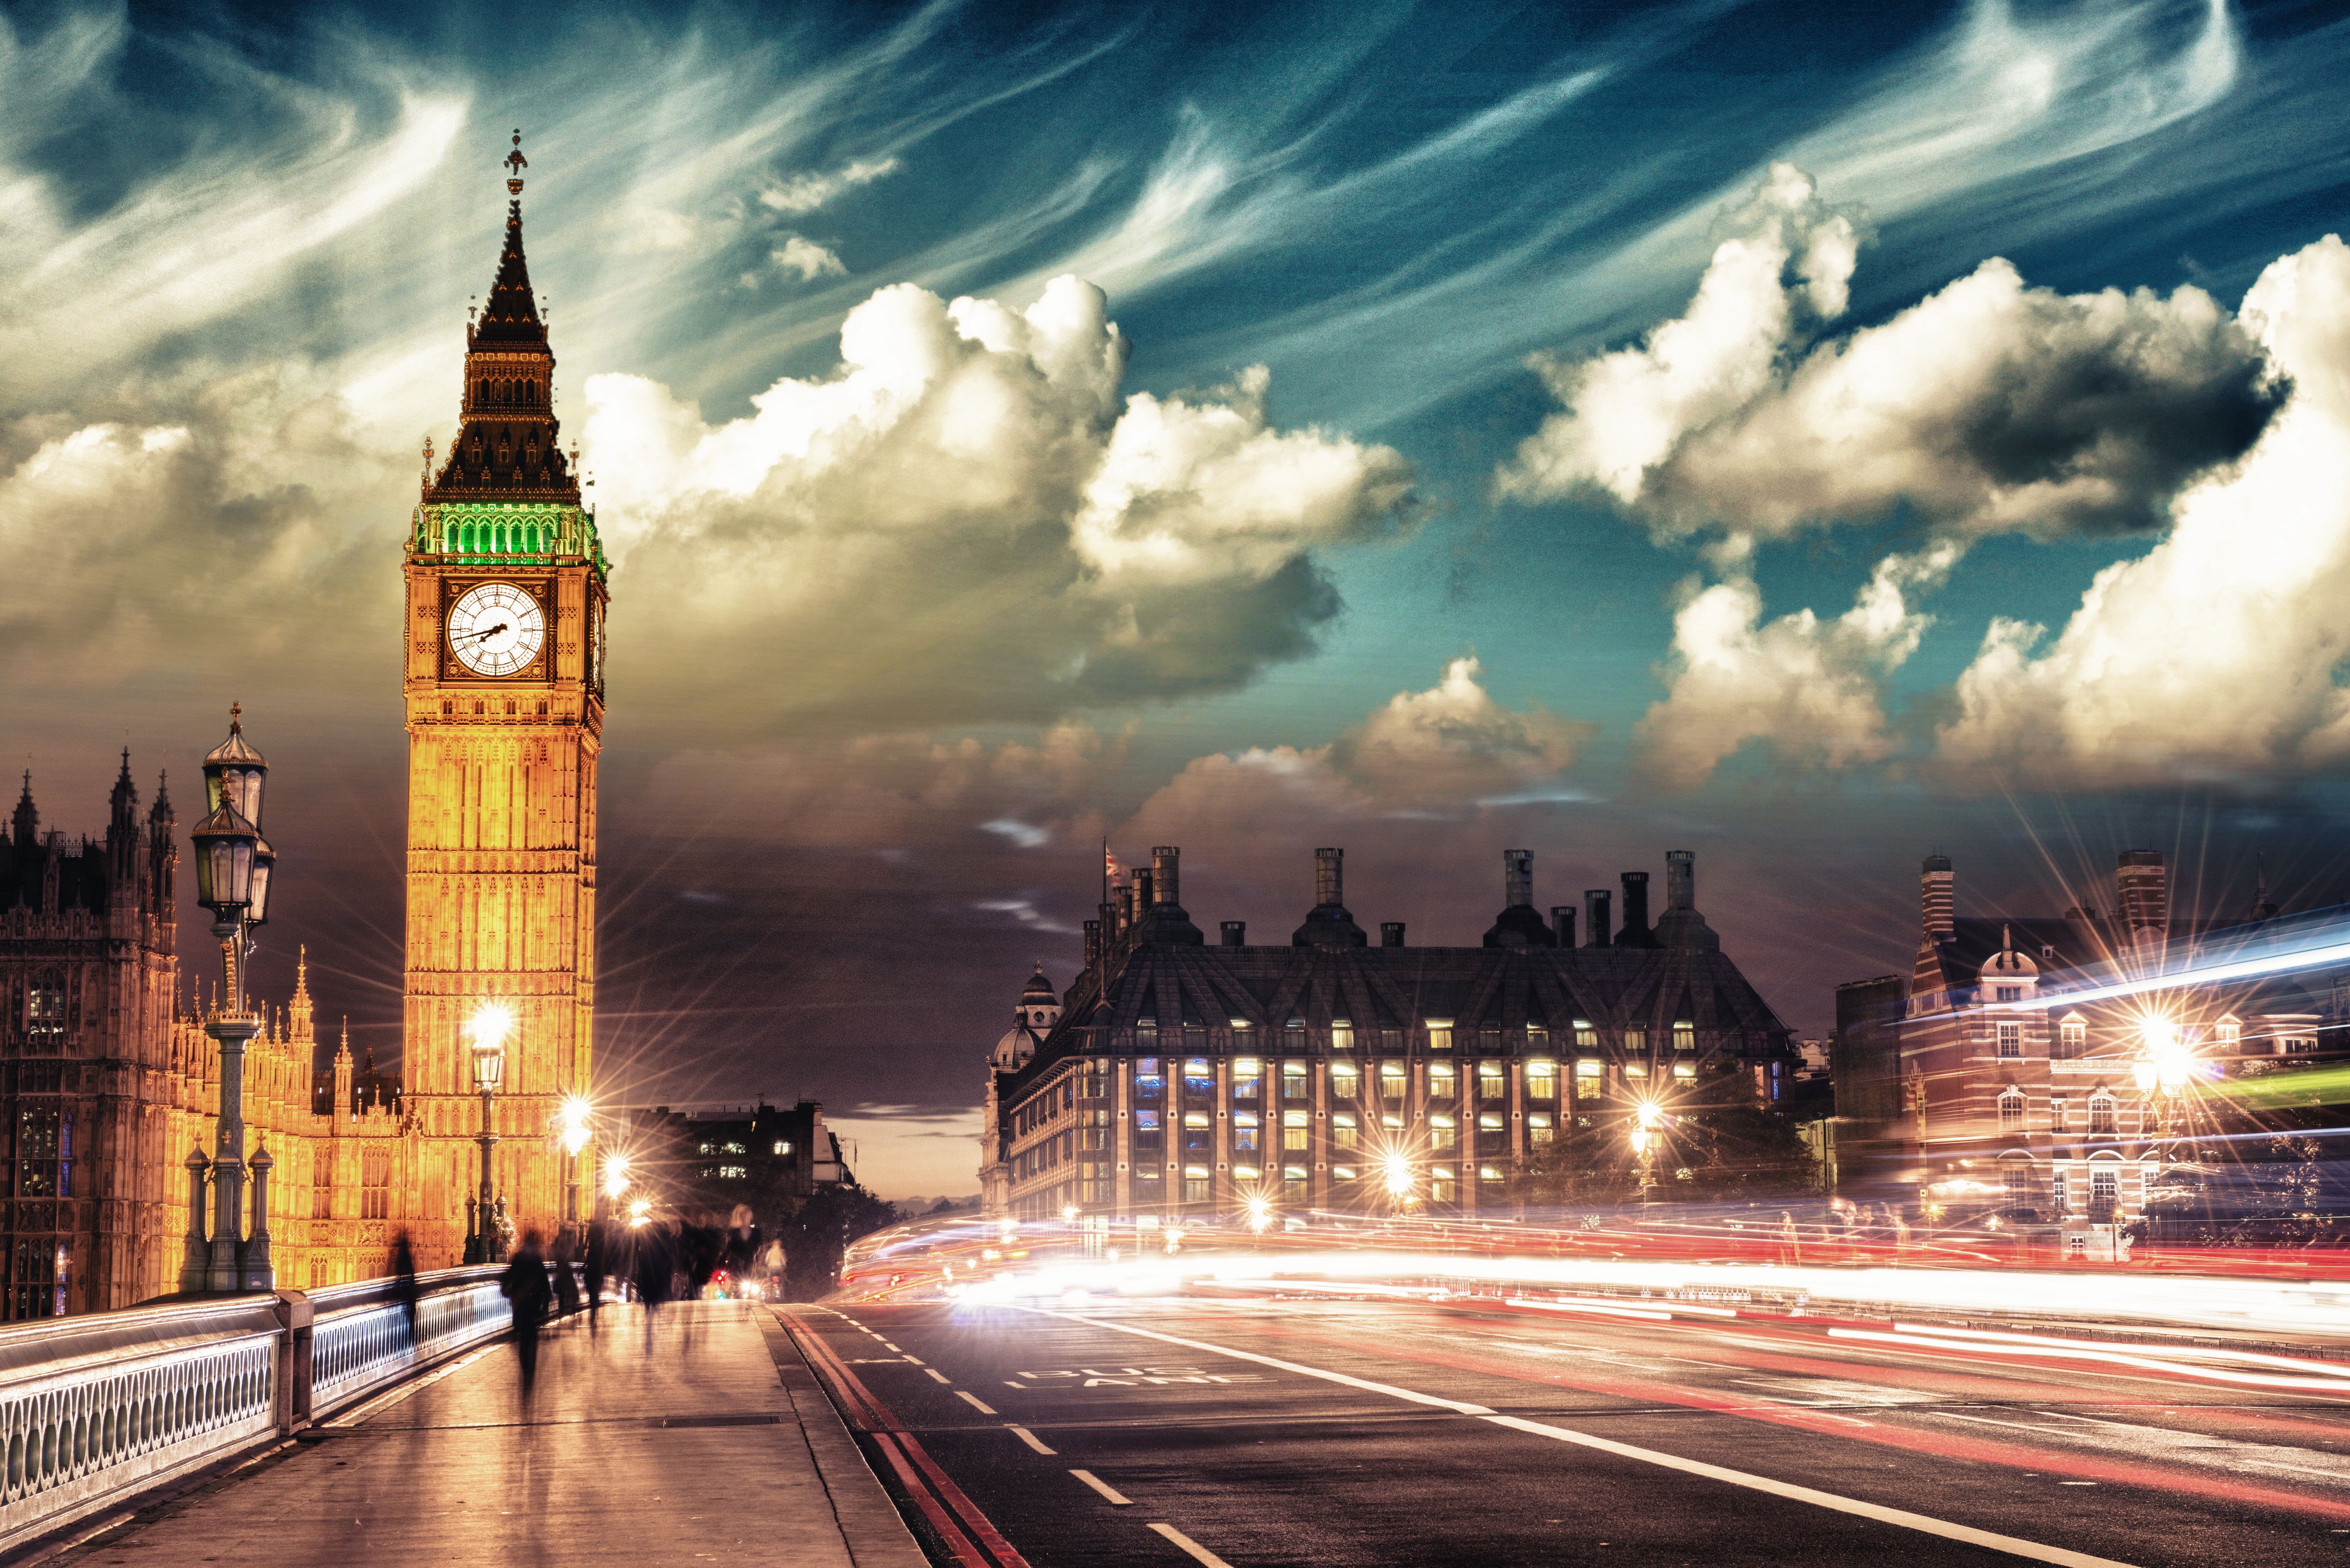 Download London Wallpaper Cool Images #7e101630gi - Download Page ...